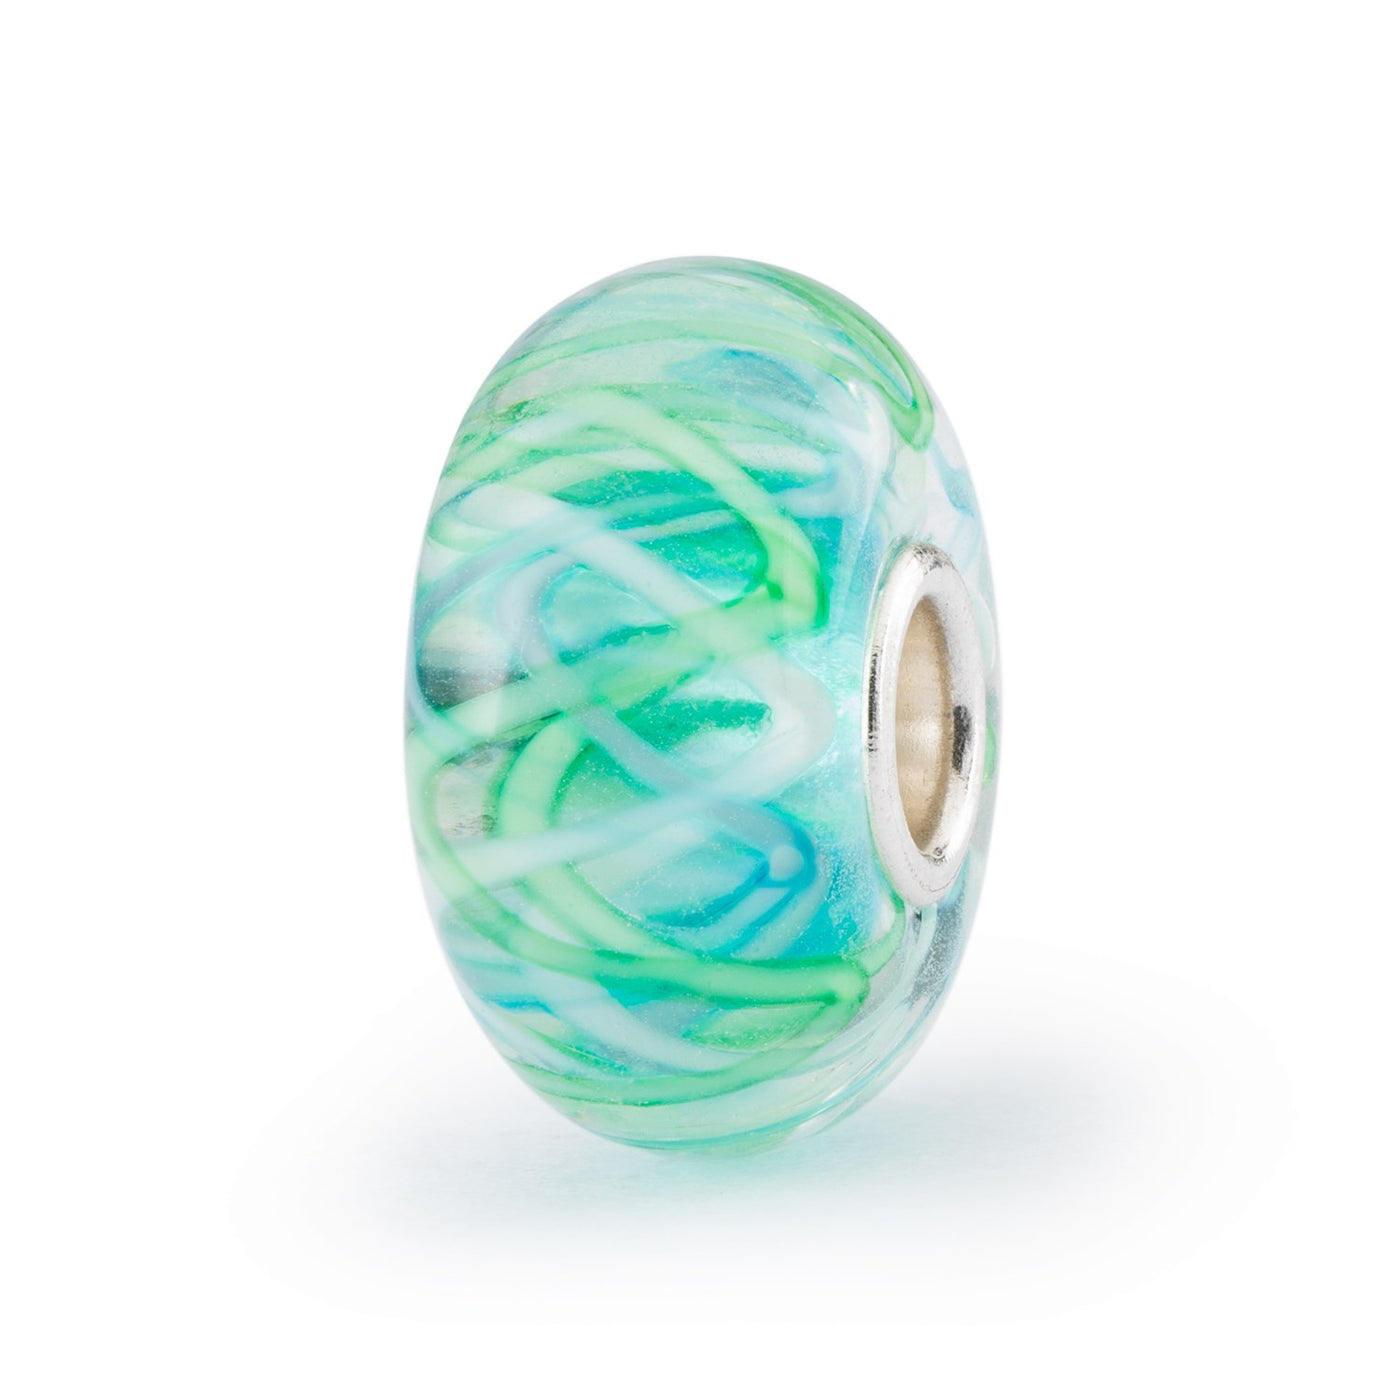 Inside the glass bead thin stripes of pale green, white and light blue formed in a criss-cross pattern.